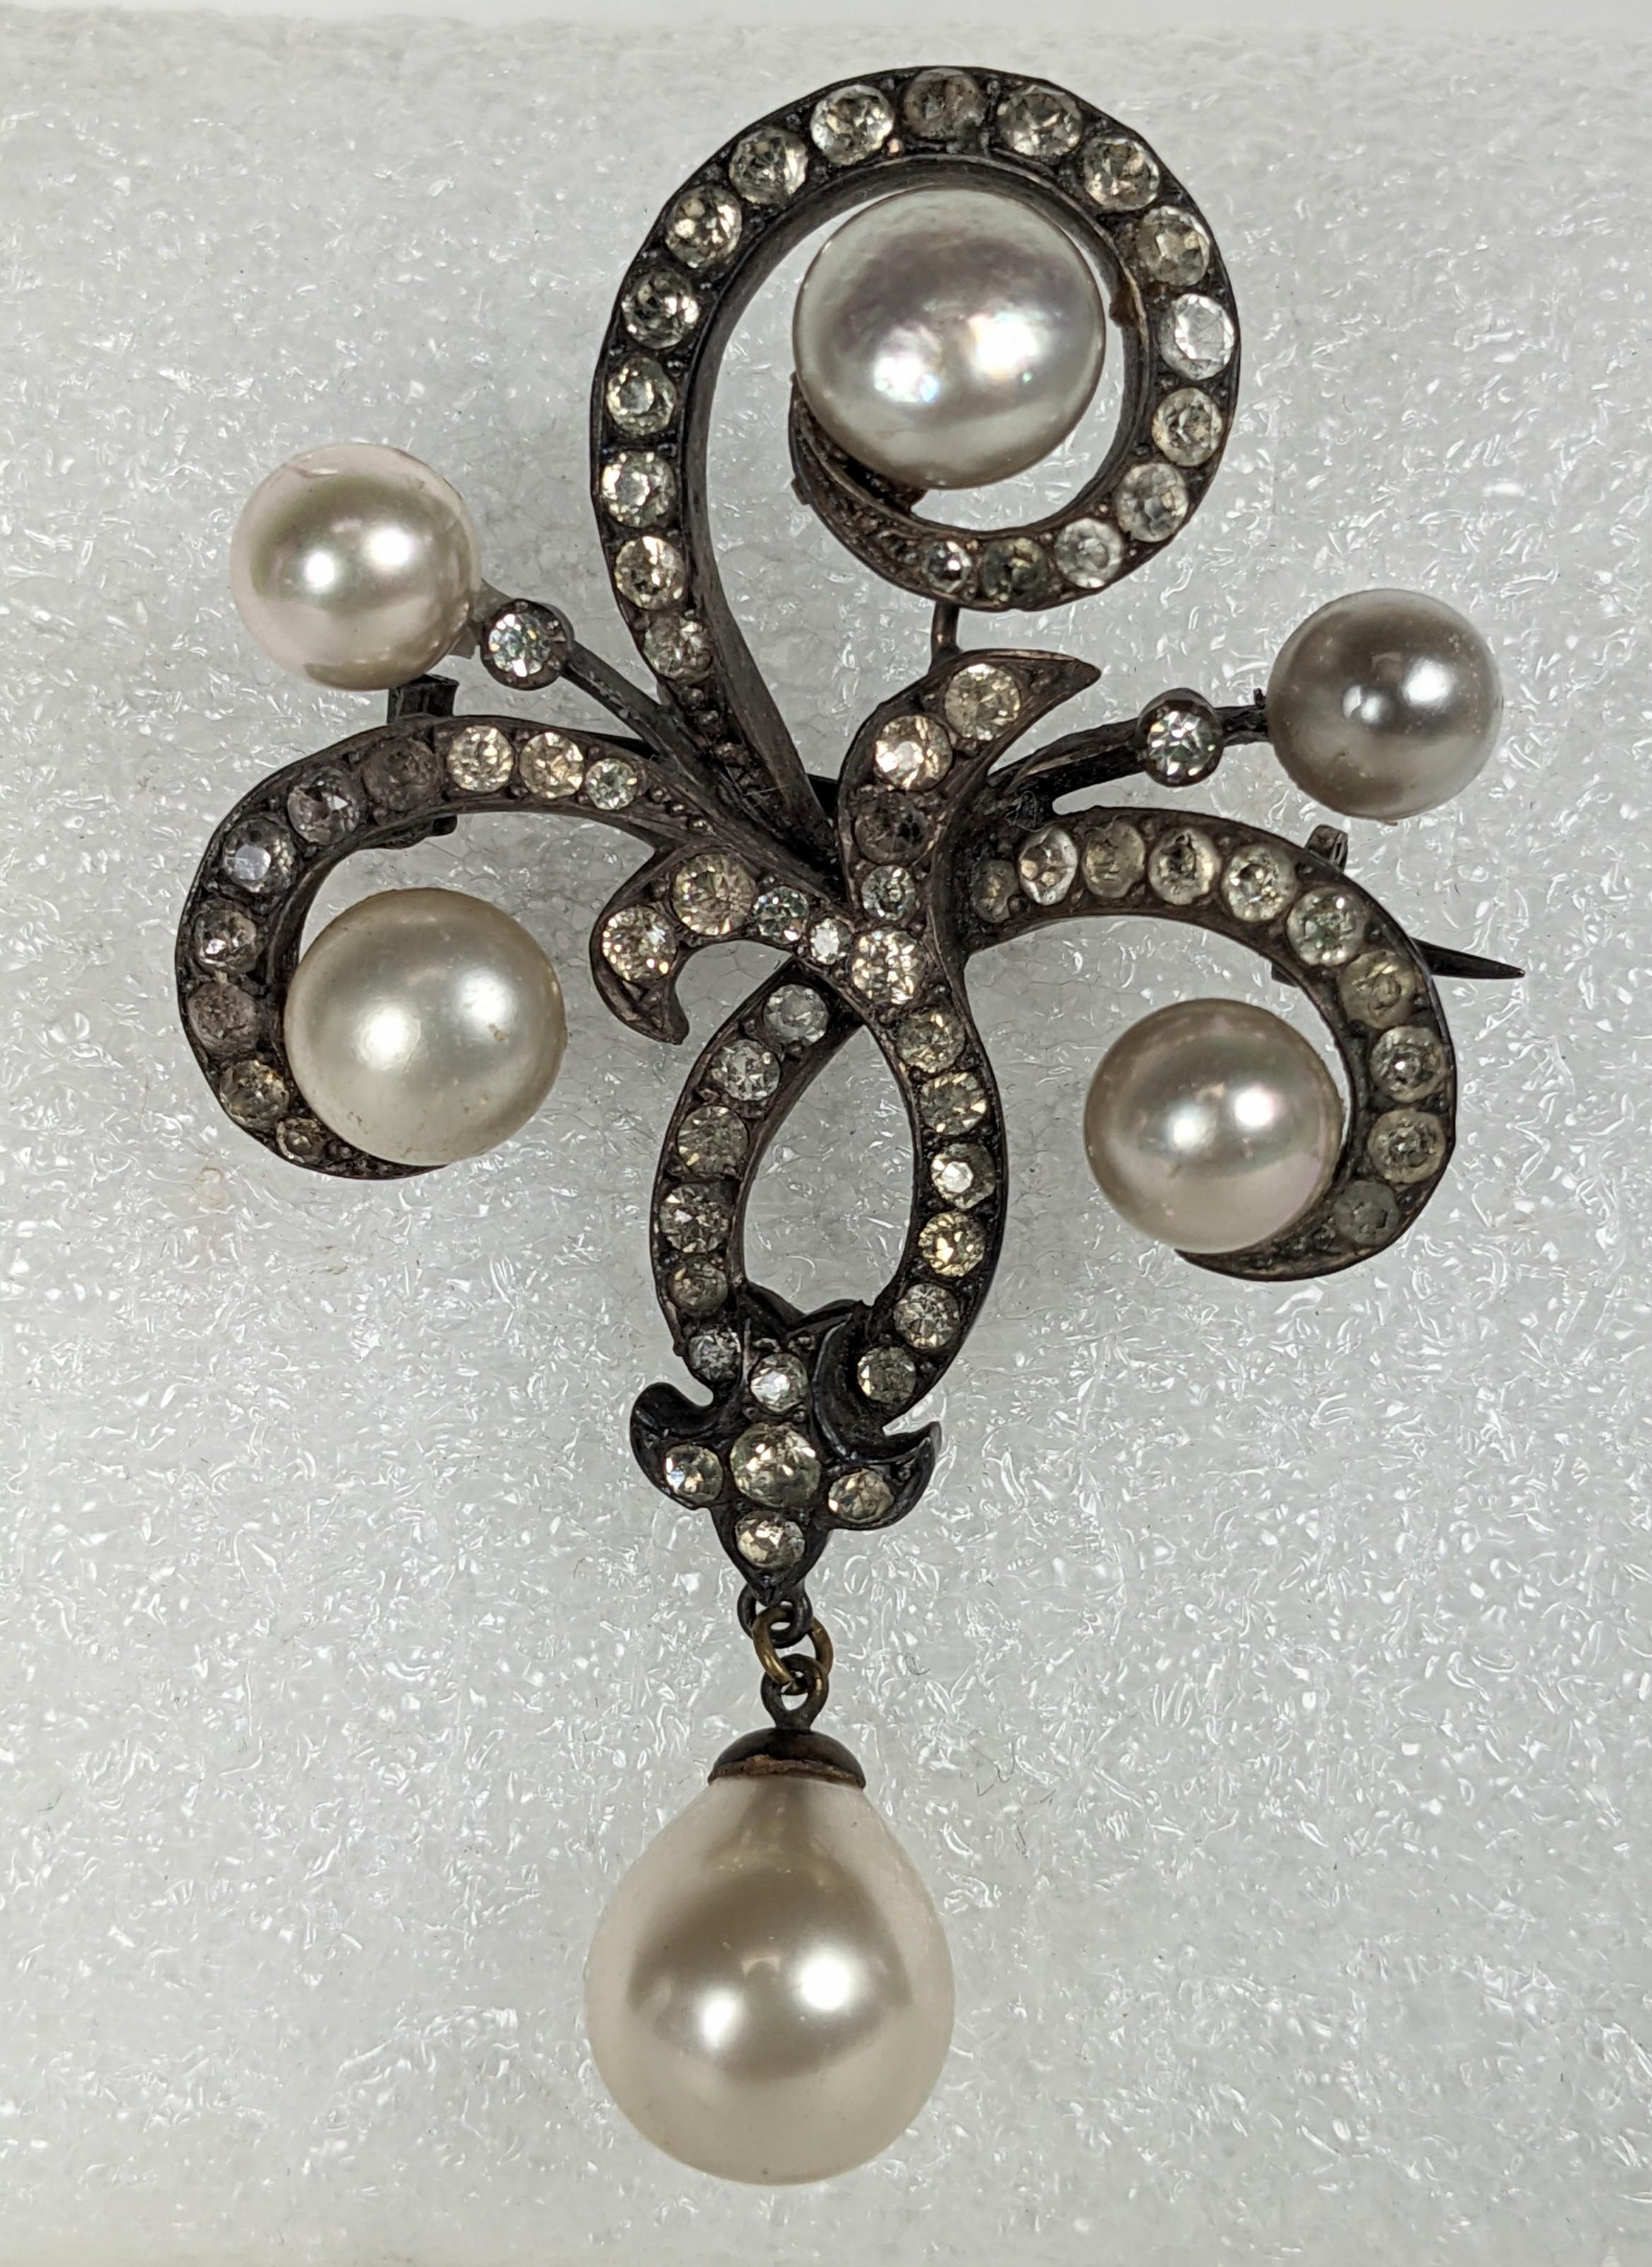 Elegant Edwardian Paste and Faux Pearl Brooch from the late 19th Century set in sterling. Made in France with sterling hallmarks on hook closure. Heavy quality sterling hand set with pastes and faux pearls. 
1890's France. 2.75